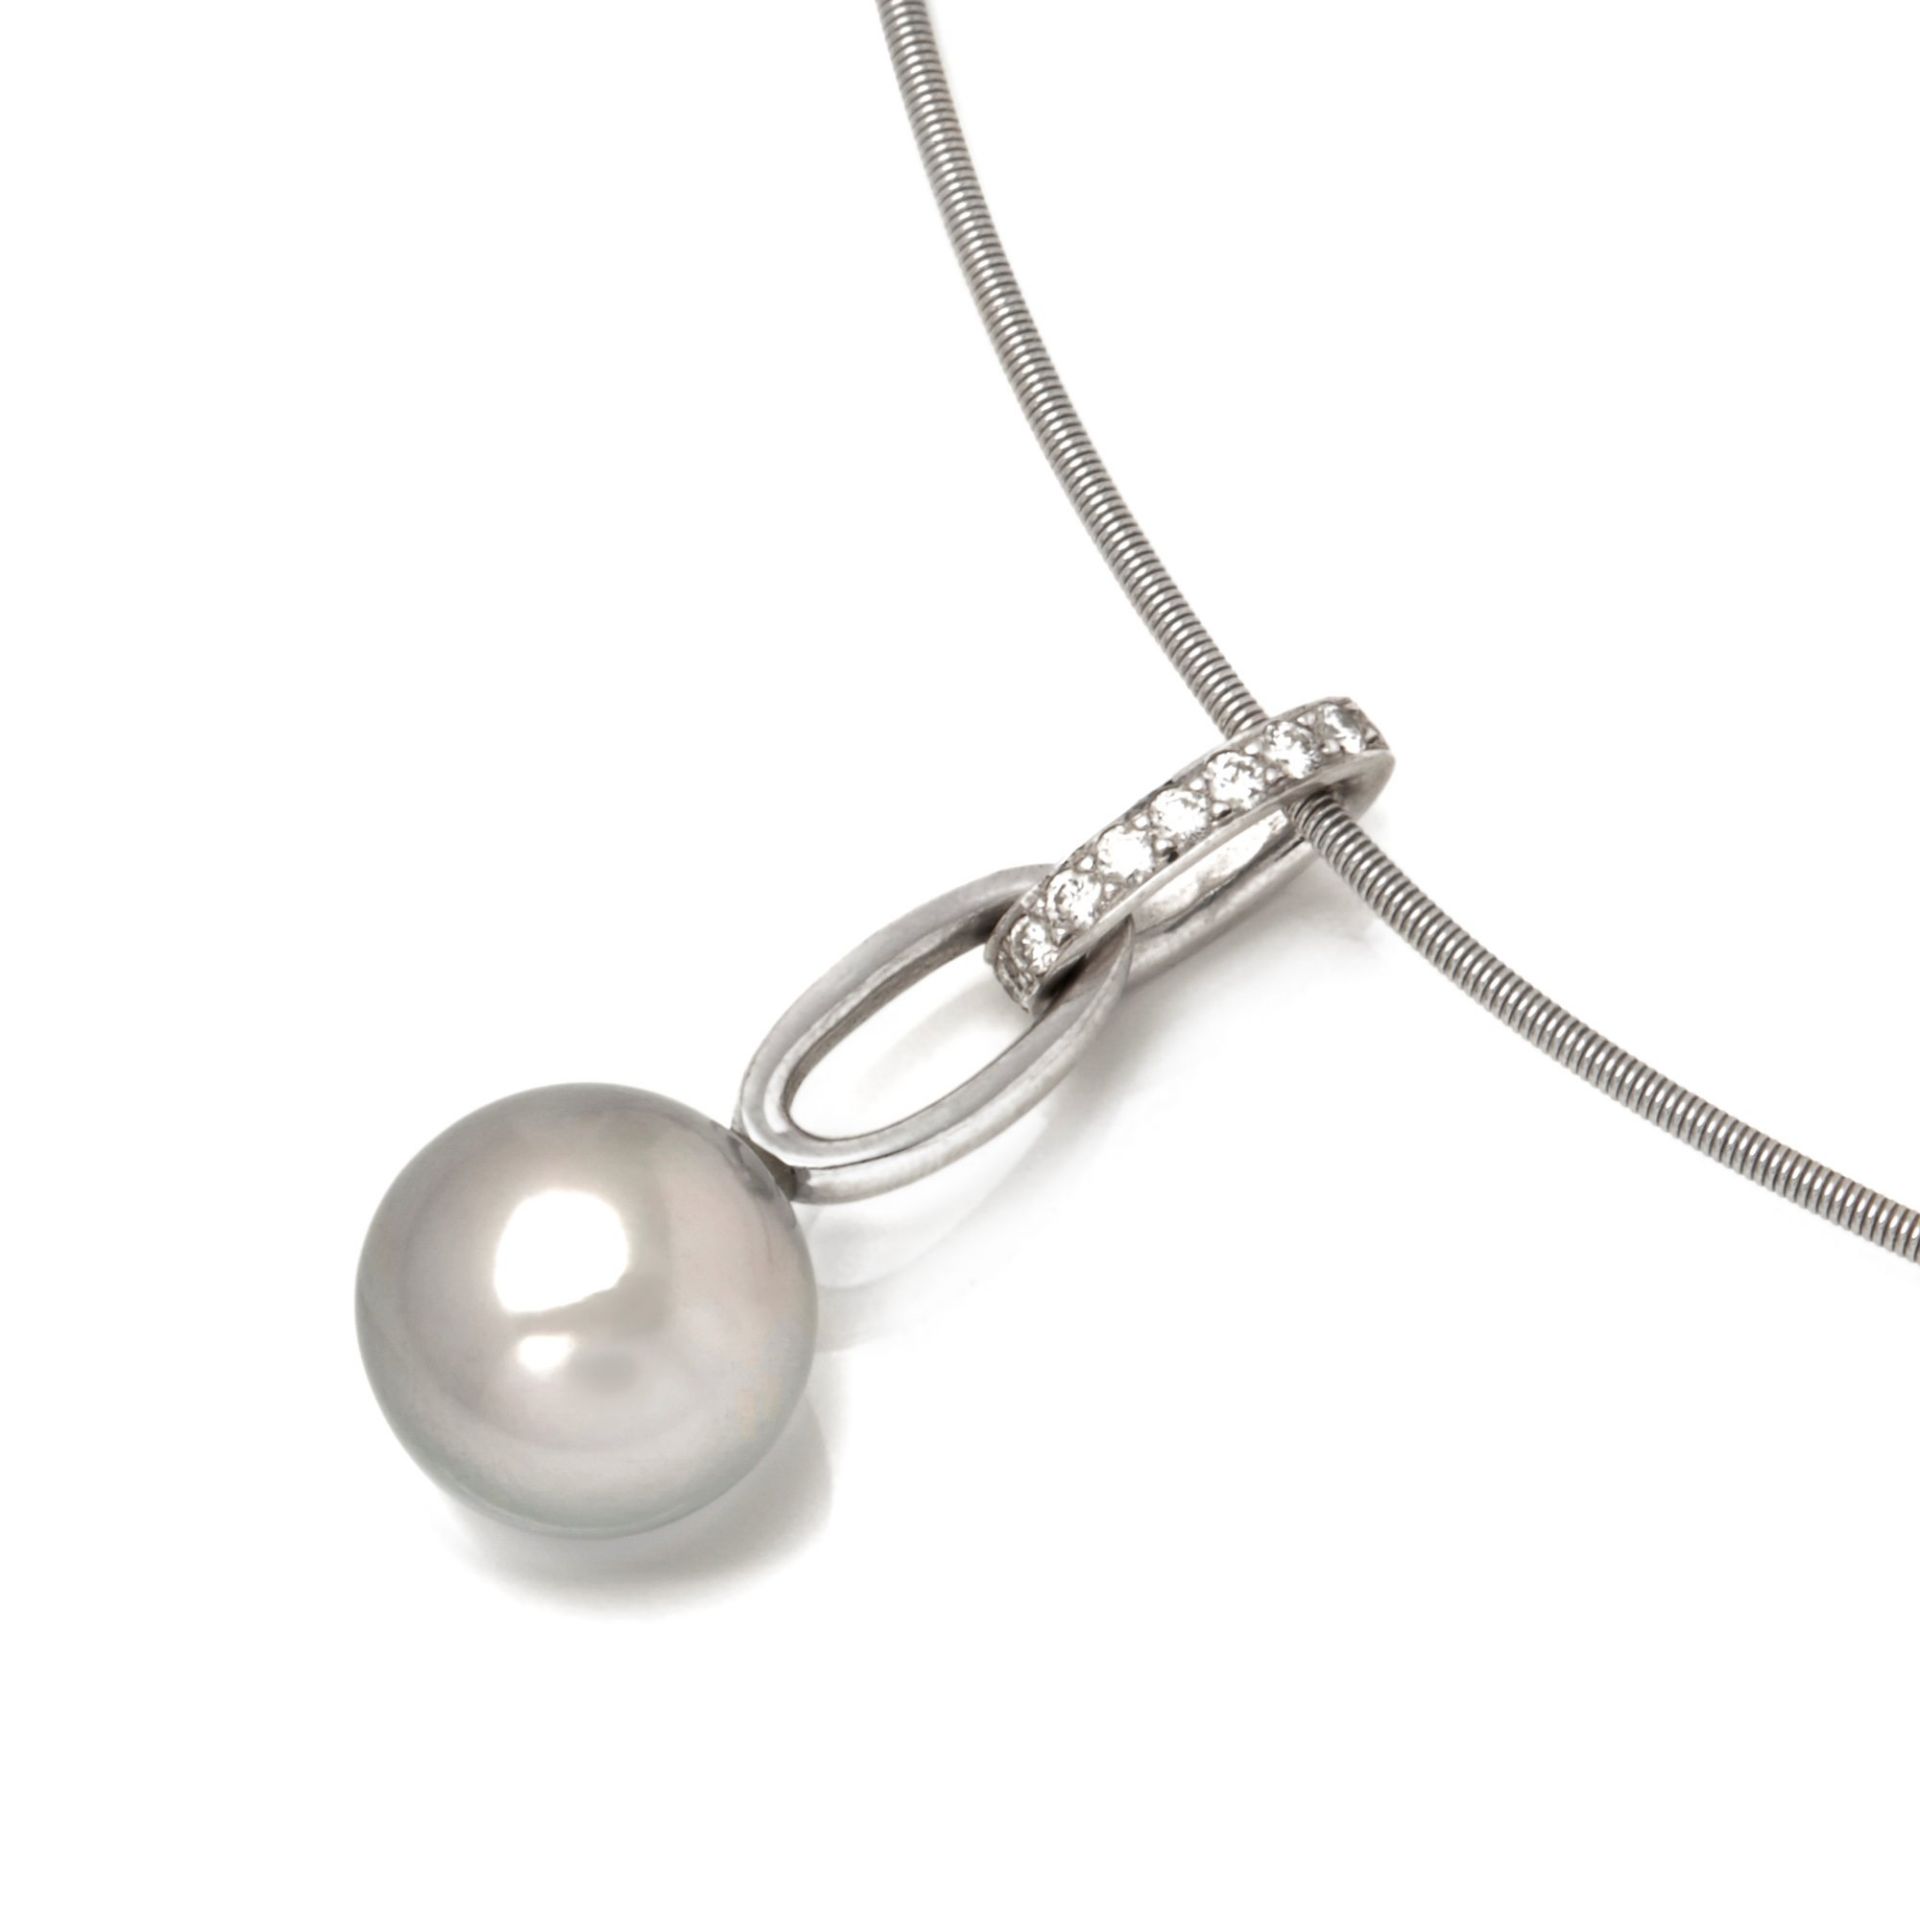 18k White Gold Cultured Pearl & Diamond Pendant Necklace - Image 2 of 8